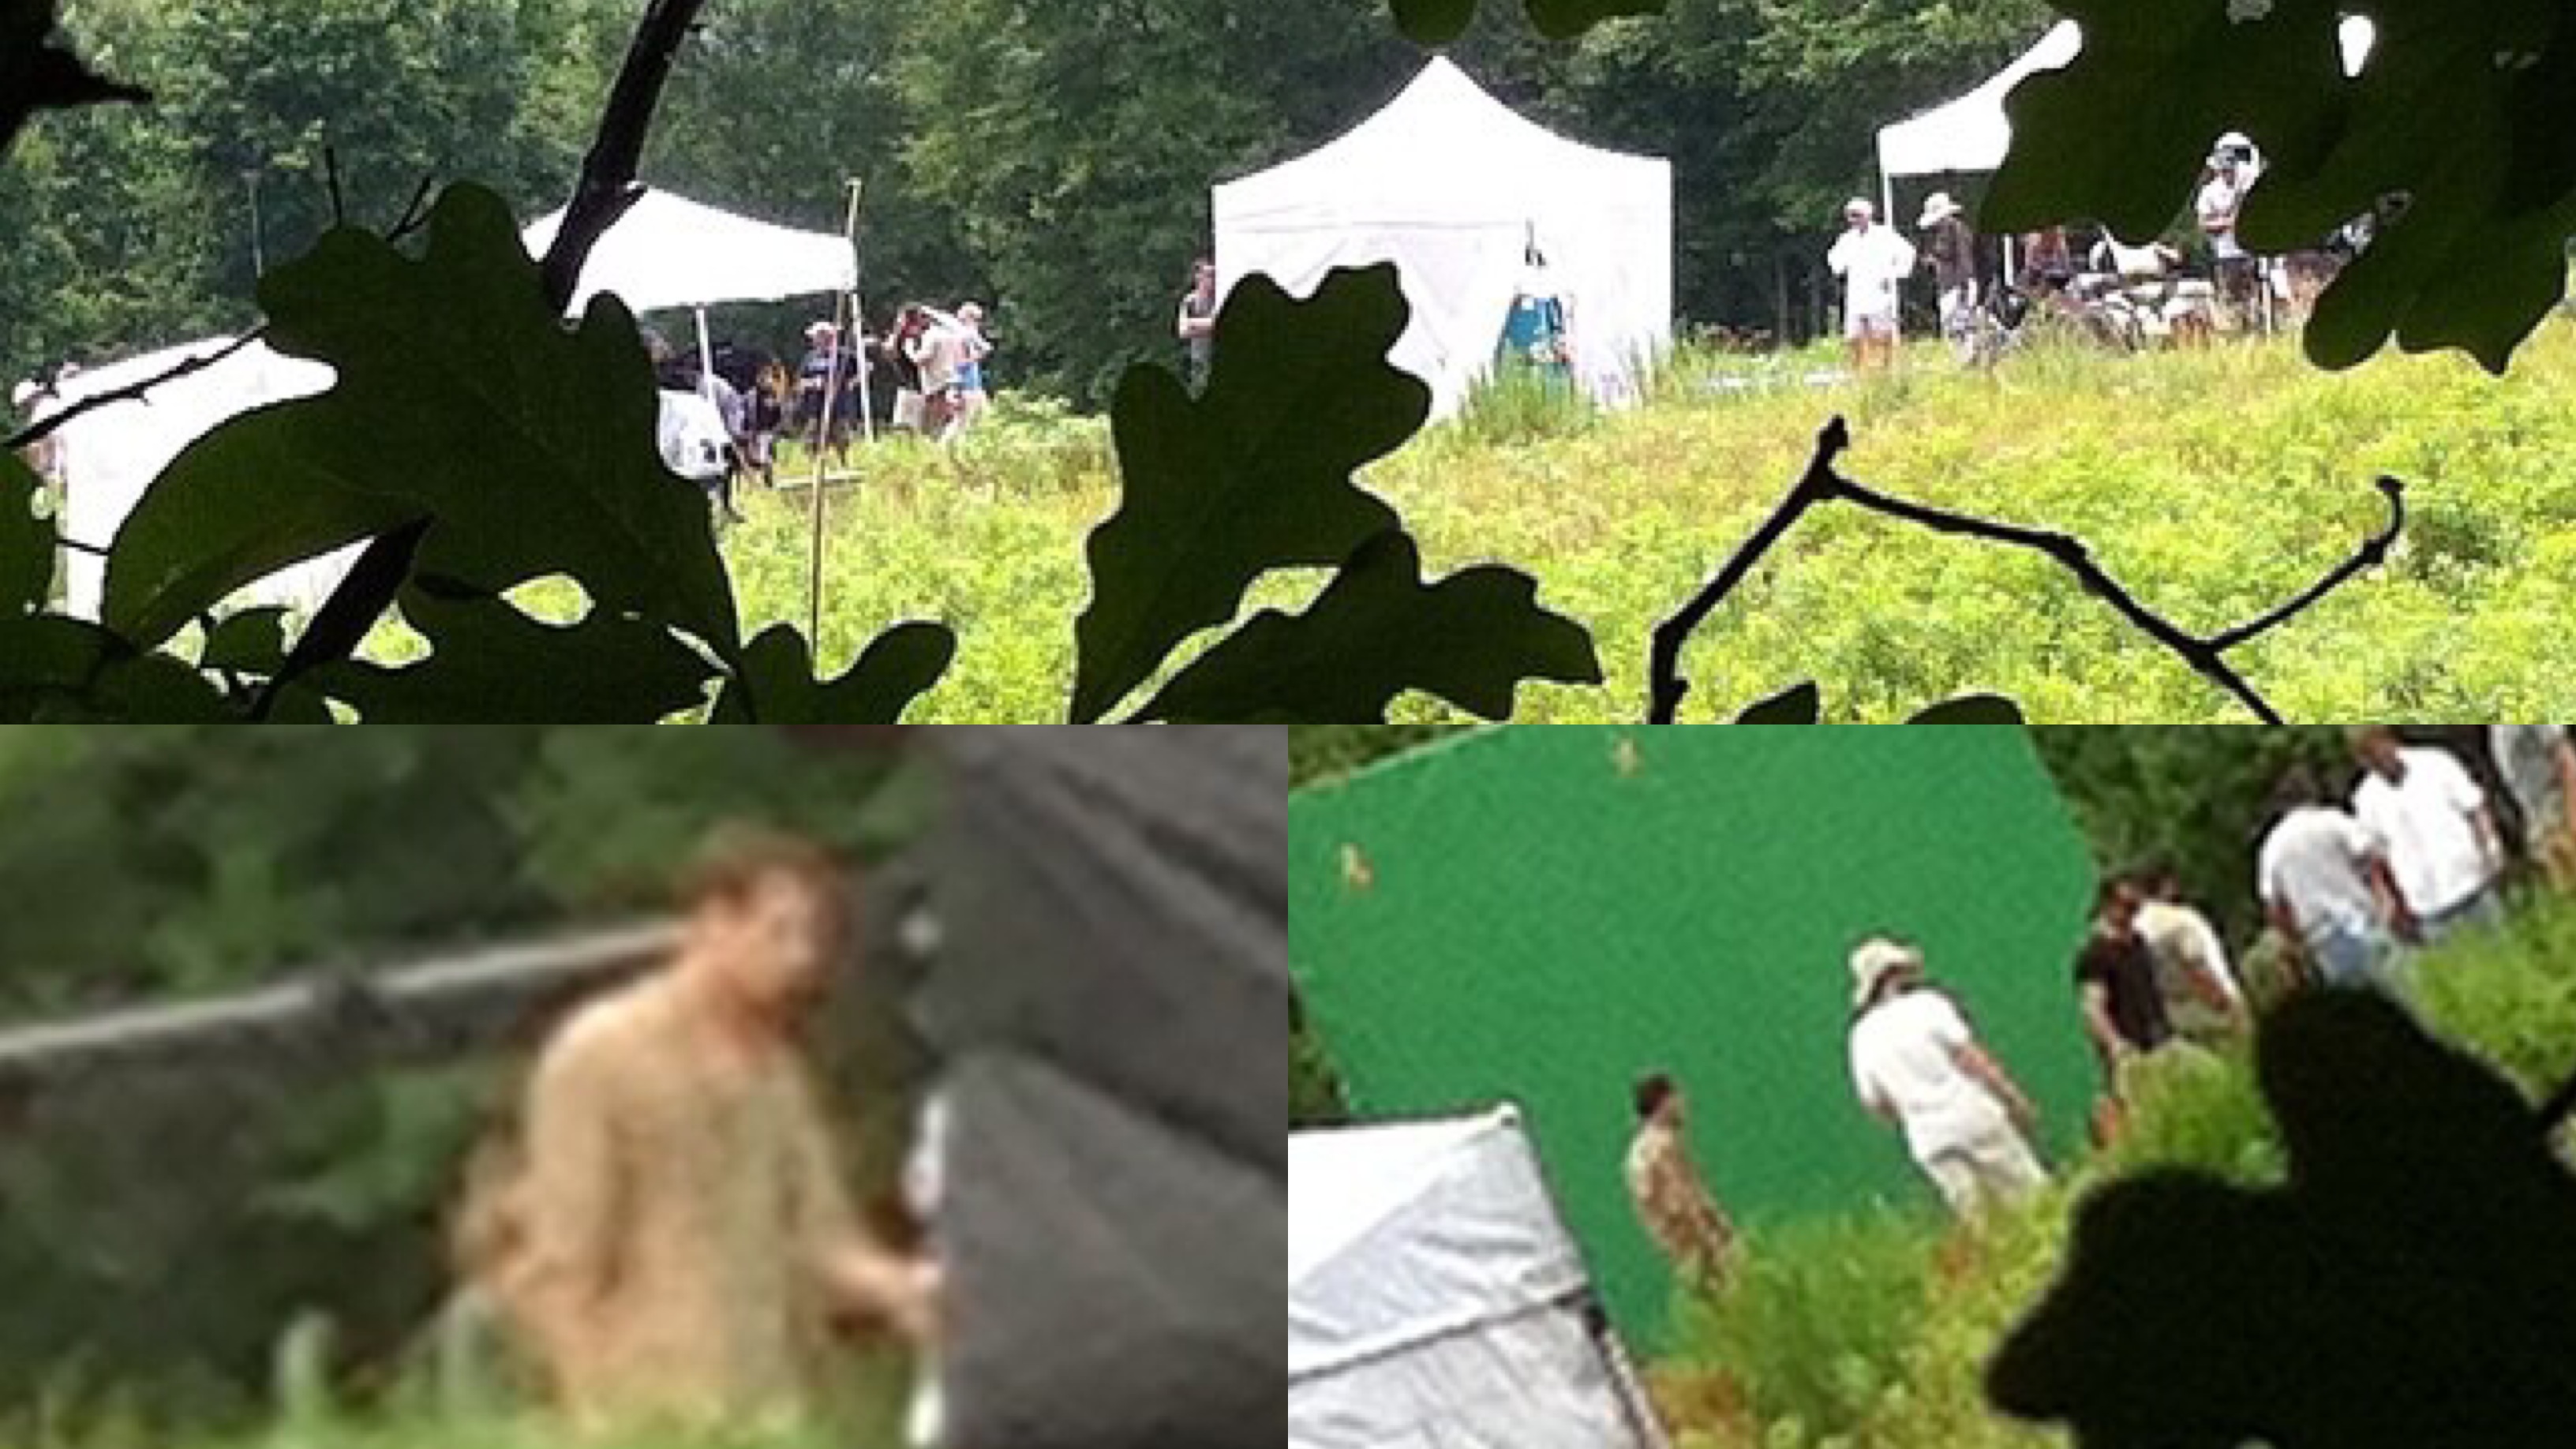 New Insurgent Fan Set Photos Show Theo James in Amity Clothing